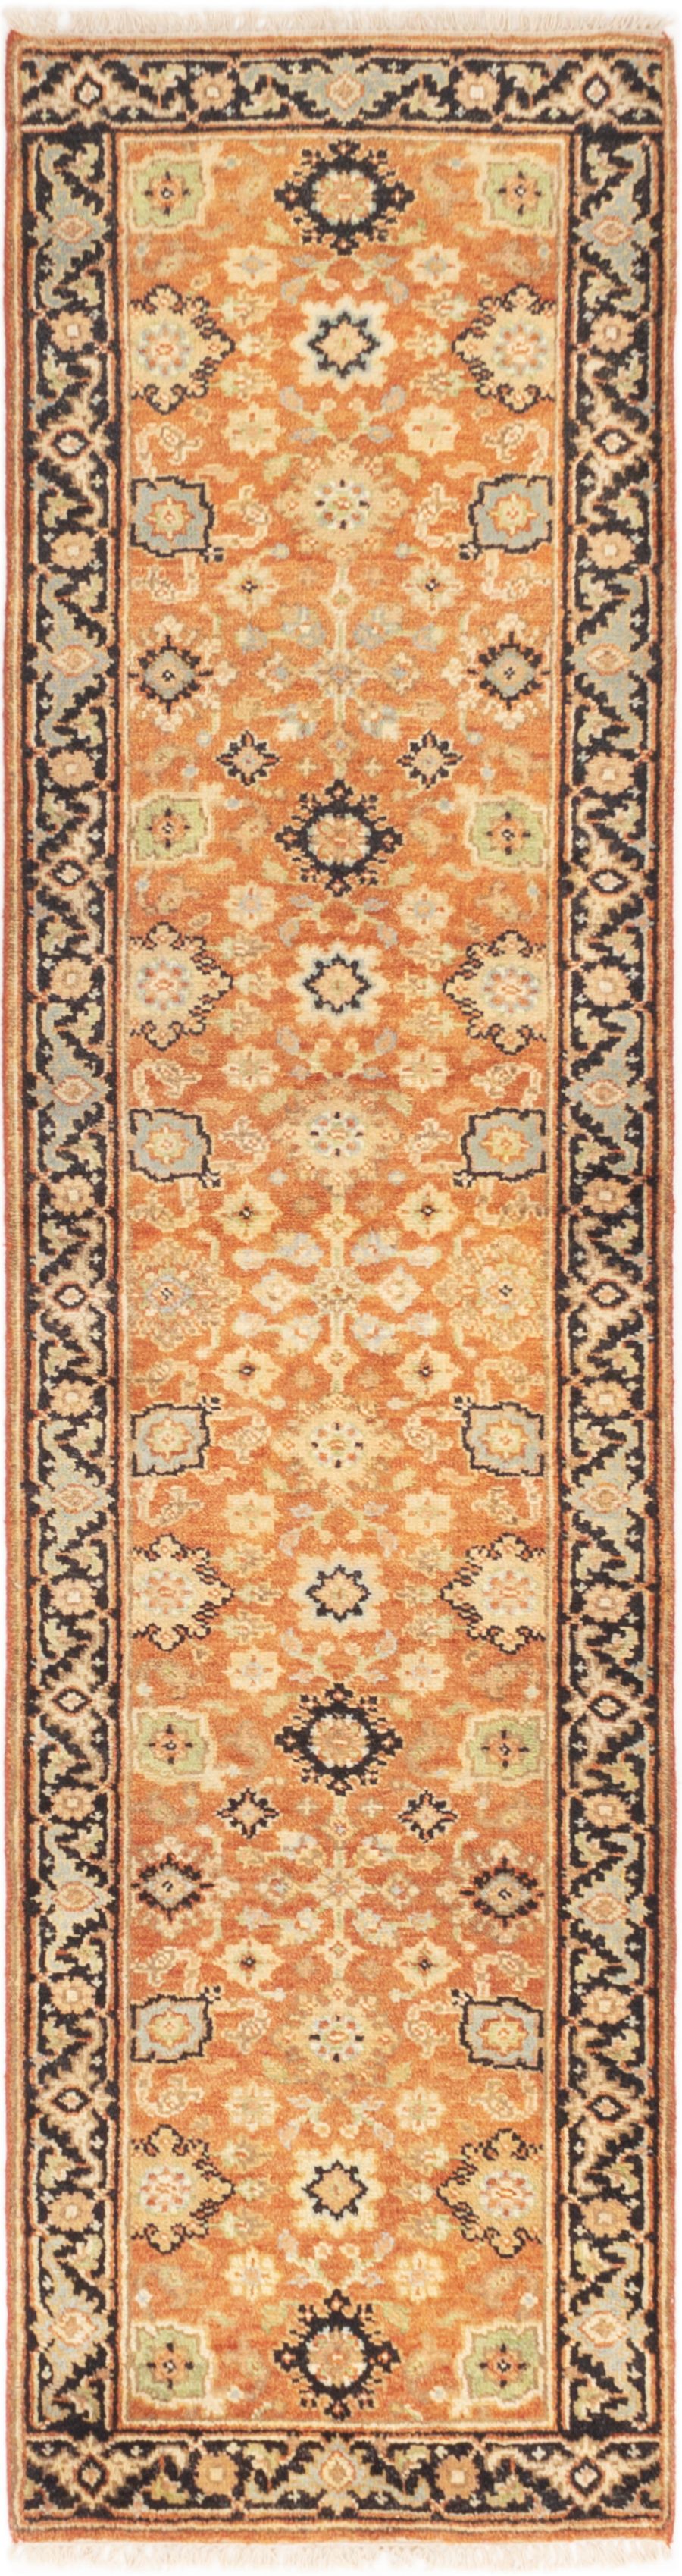 Hand-knotted Serapi Heritage Copper Wool Rug 2'8" x 9'11" Size: 2'8" x 9'11"  